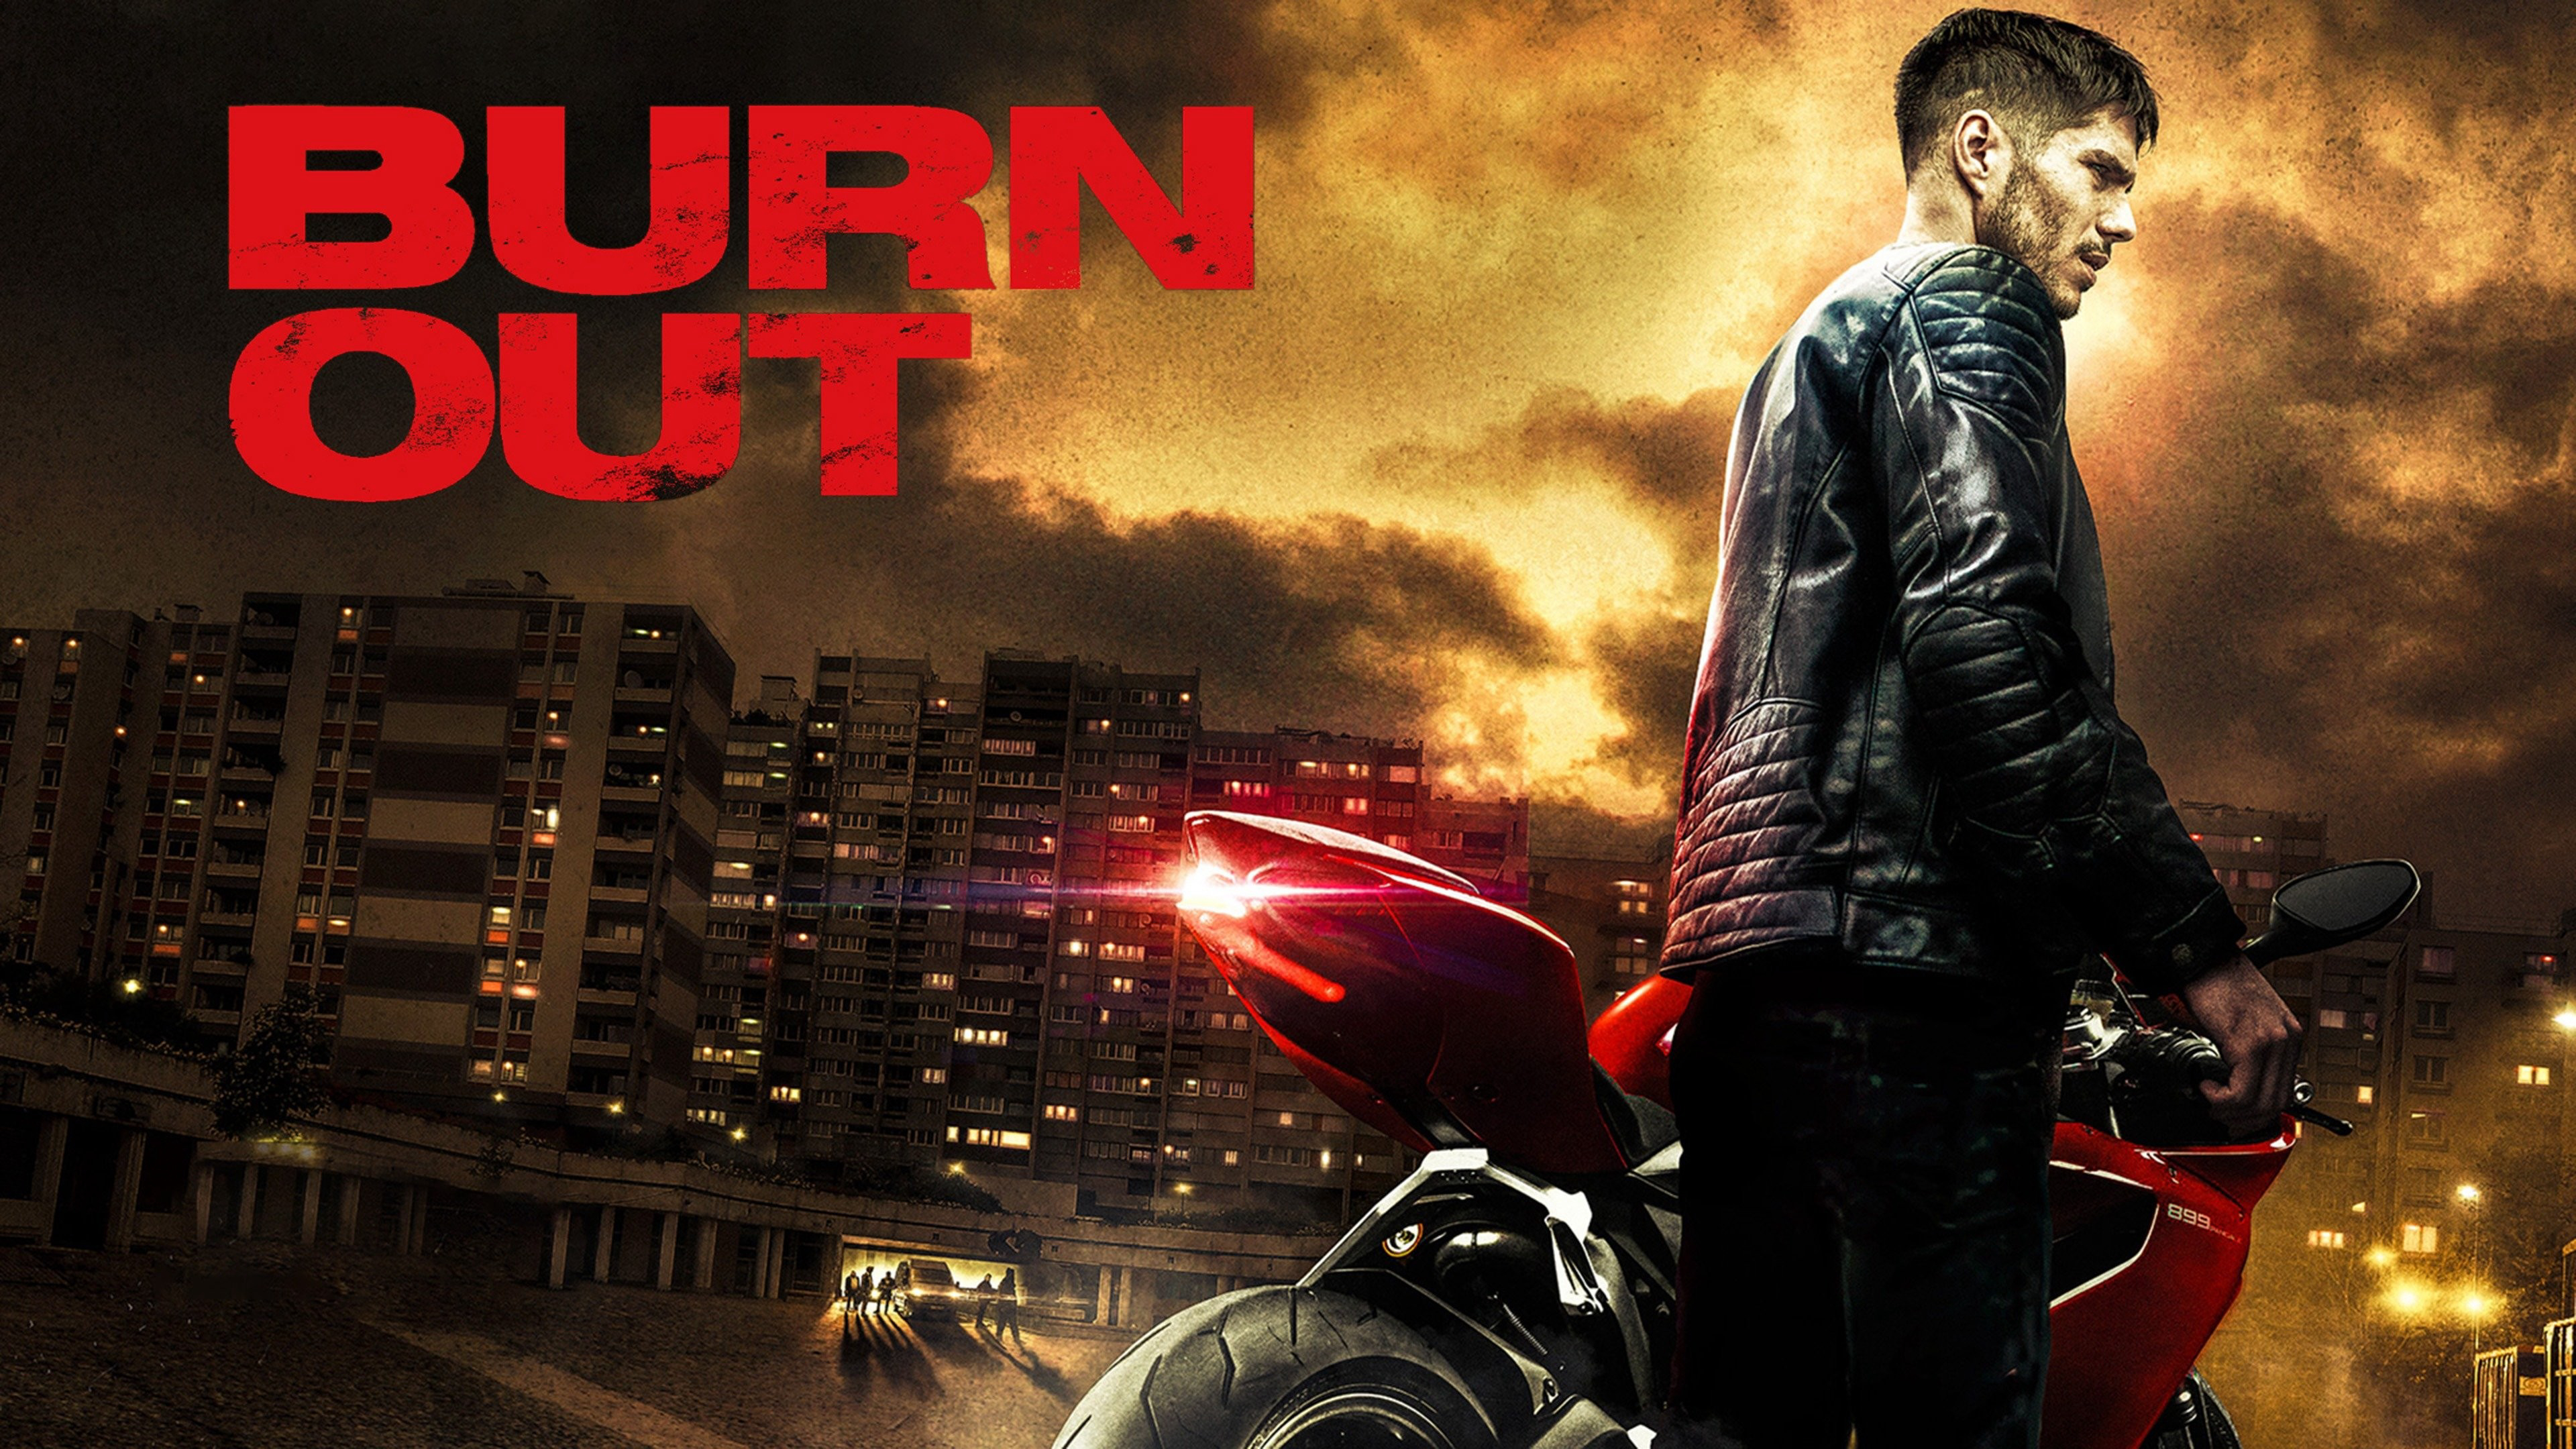 Burn Out / Burn Out (2017)